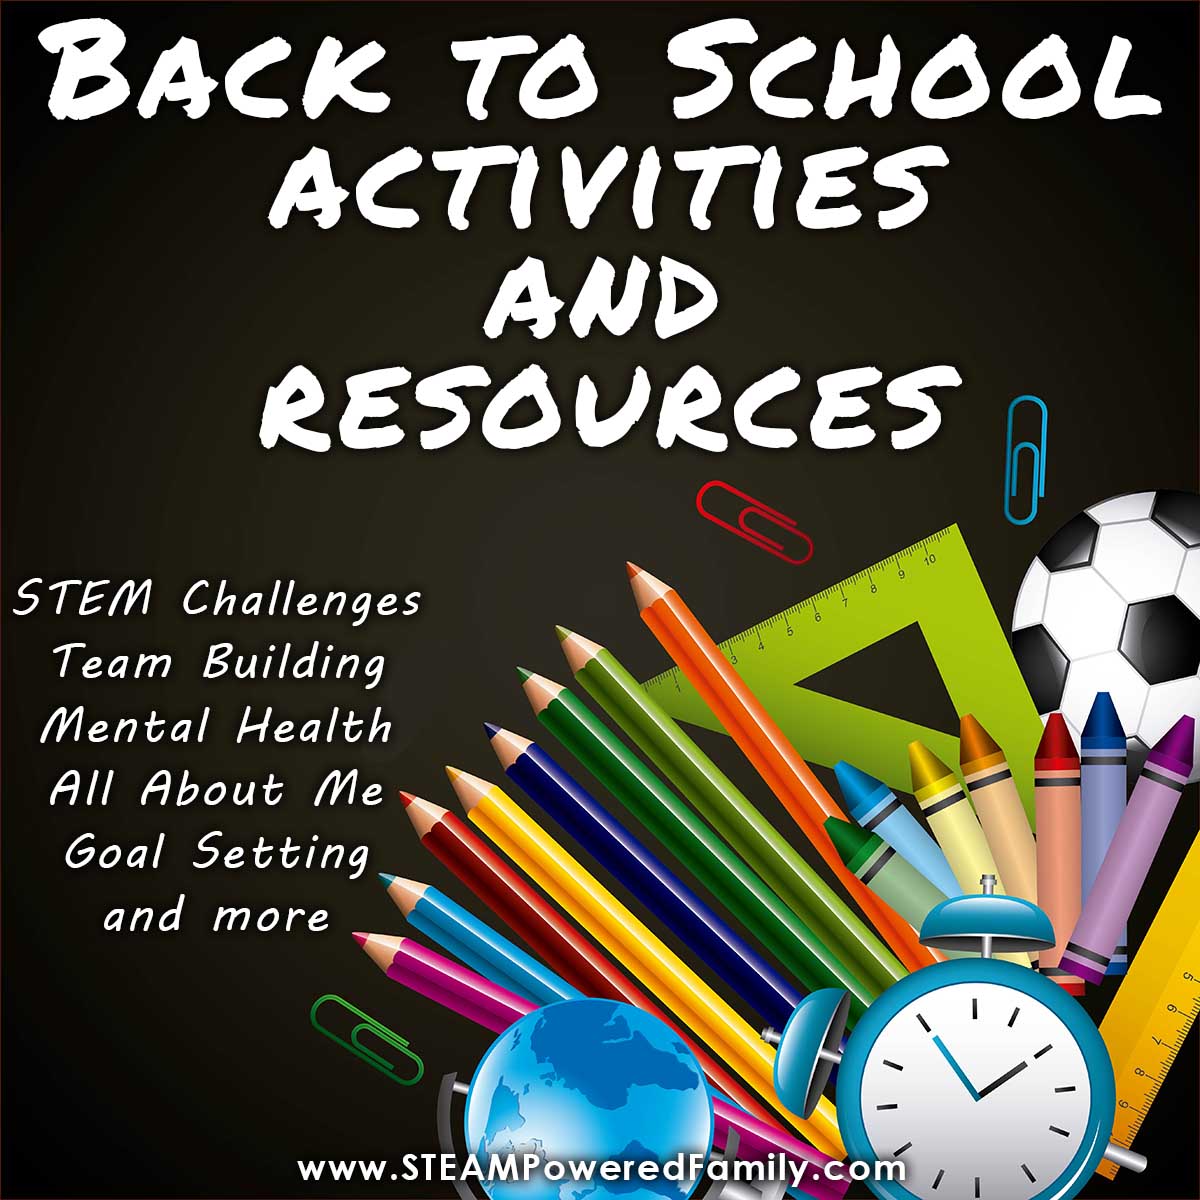 Back To School Activities and Resources